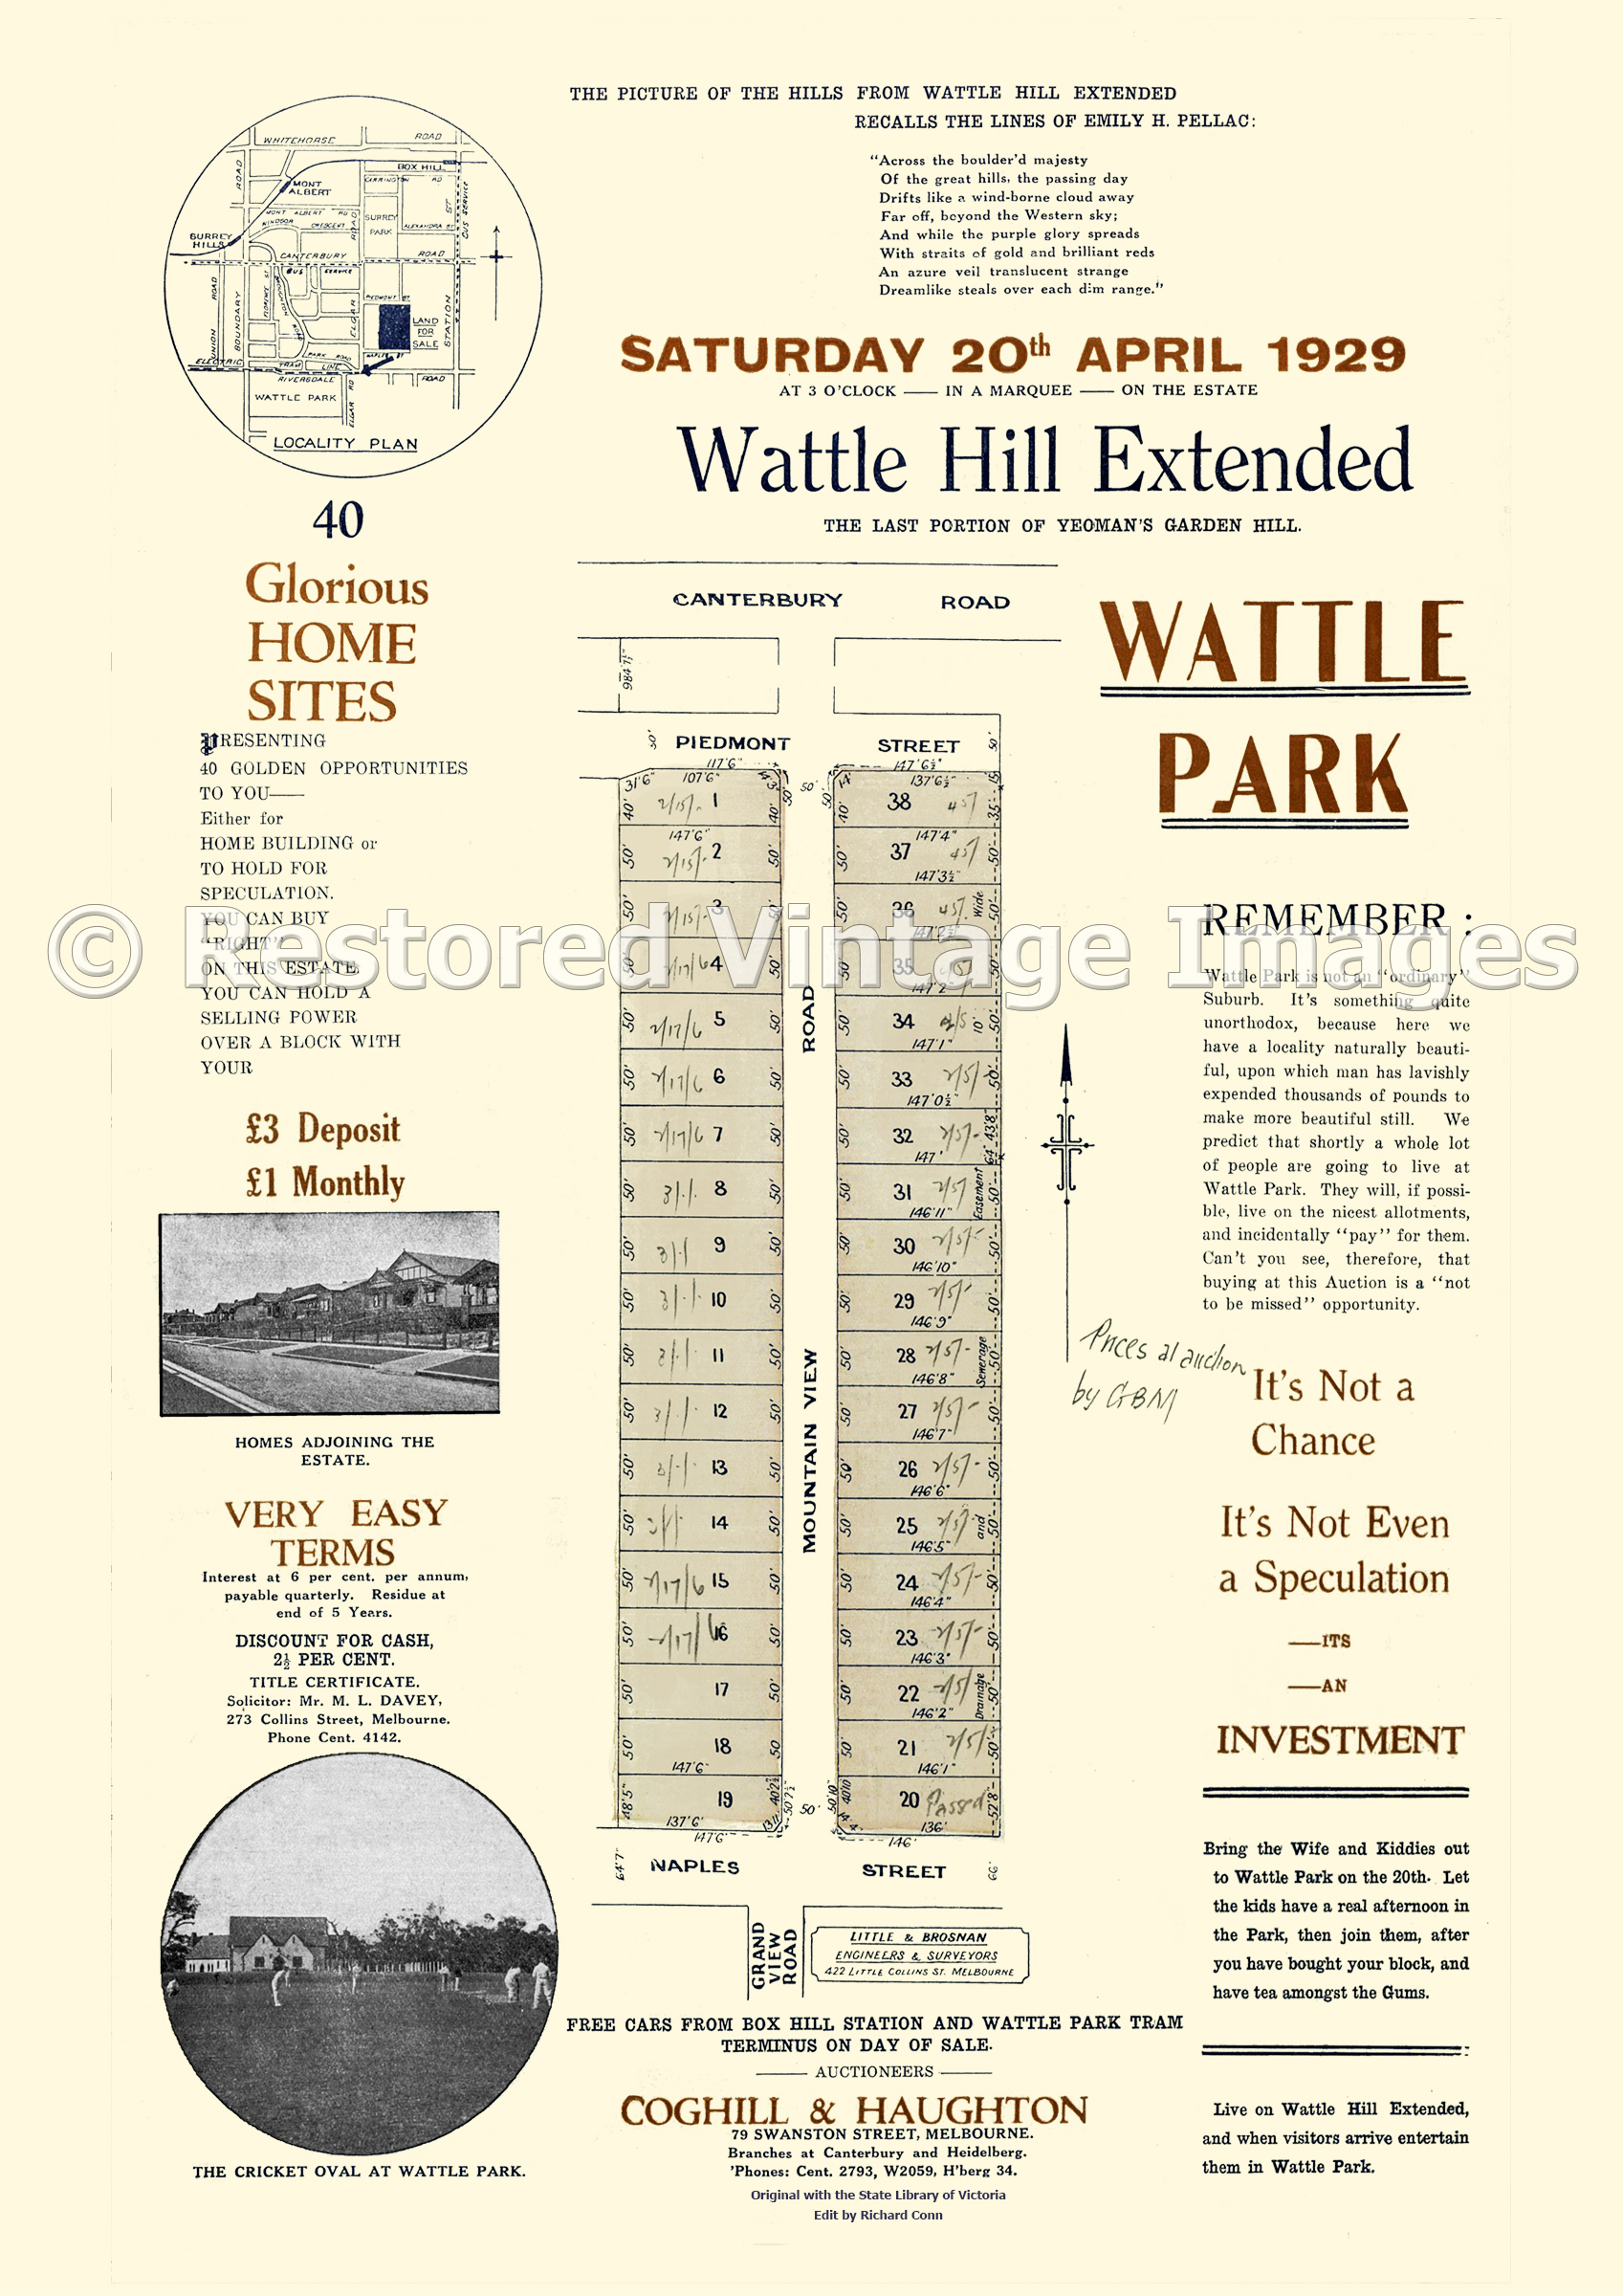 Wattle Hill Extended Wattle Park 20th April 1929 – Box Hill South